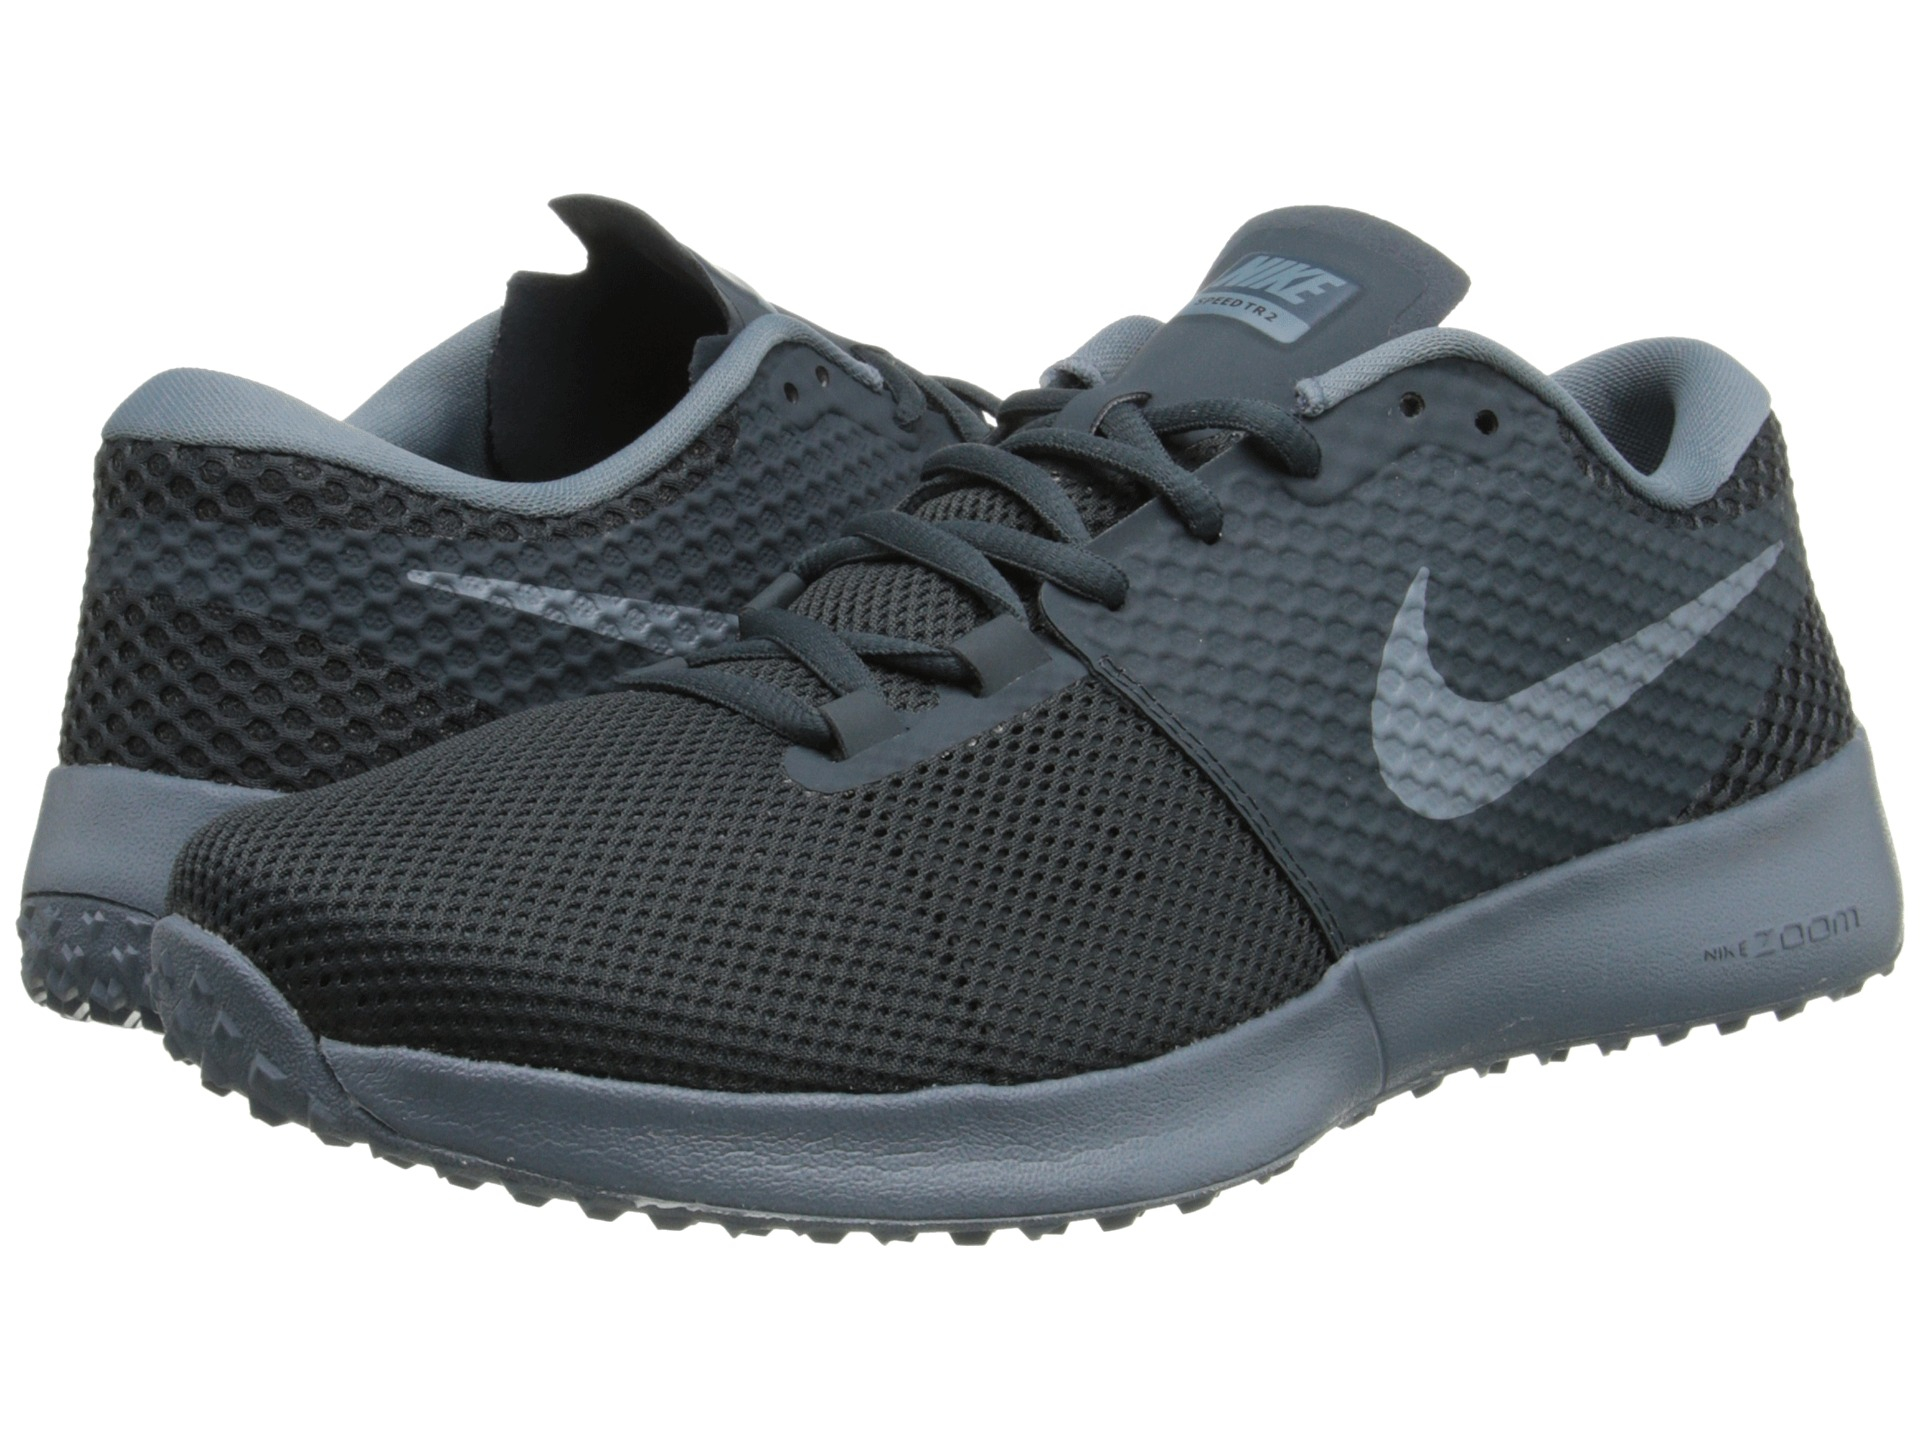 Nike Zoom Speed Tr 2 in Gray for Men - Lyst